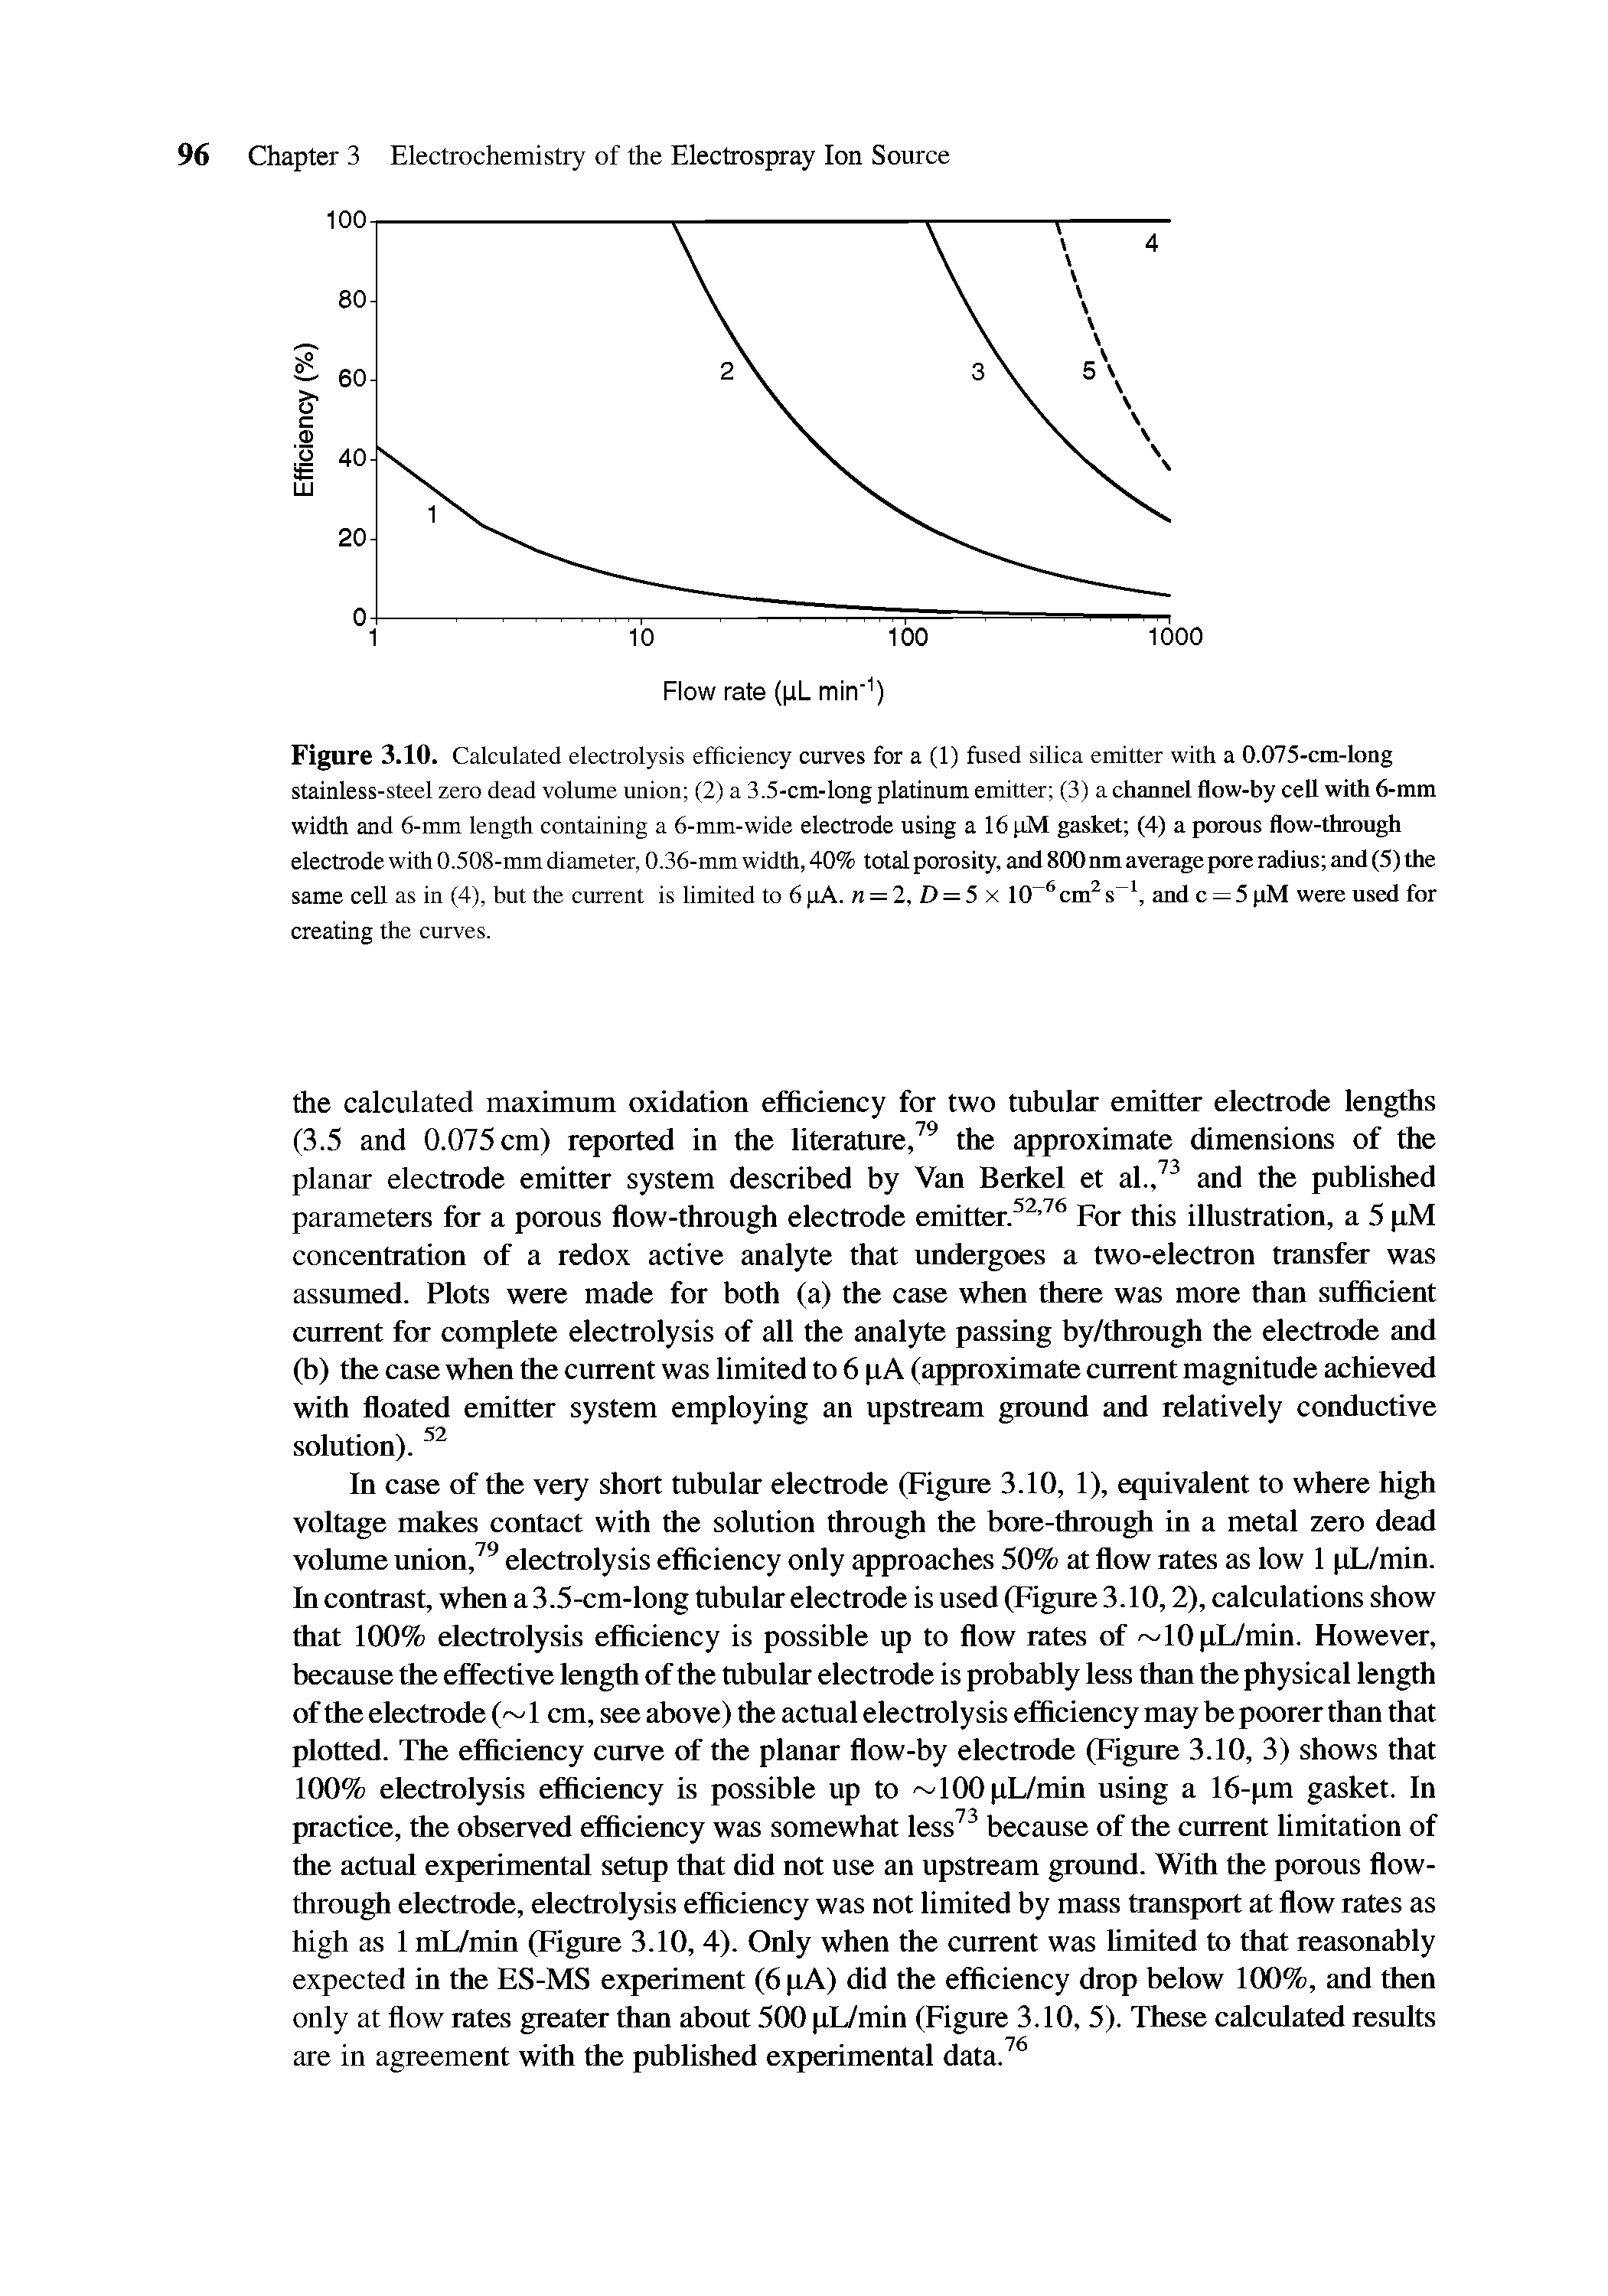 Figure 3.10. Calculated electrolysis efficiency curves for a (1) fused silica emitter with a 0.075-cm-long stainless-steel zero dead volume union (2) a 3.5-cm-long platinum emitter (3) a channel flow-by cell with 6-mm width and 6-mm length containing a 6-mm-wide electrode using a 16 pM gasket (4) a pmous flow-through electrode with 0.508-mm diameter, 0.36-tmn width, 40% total porosity, and 800 nm average pore radius and (5) the same cell as in (4), but the current is limited to 6pA. n = 2, D = 5 x 10 cm s , and e = 5pM were used for creating the curves.